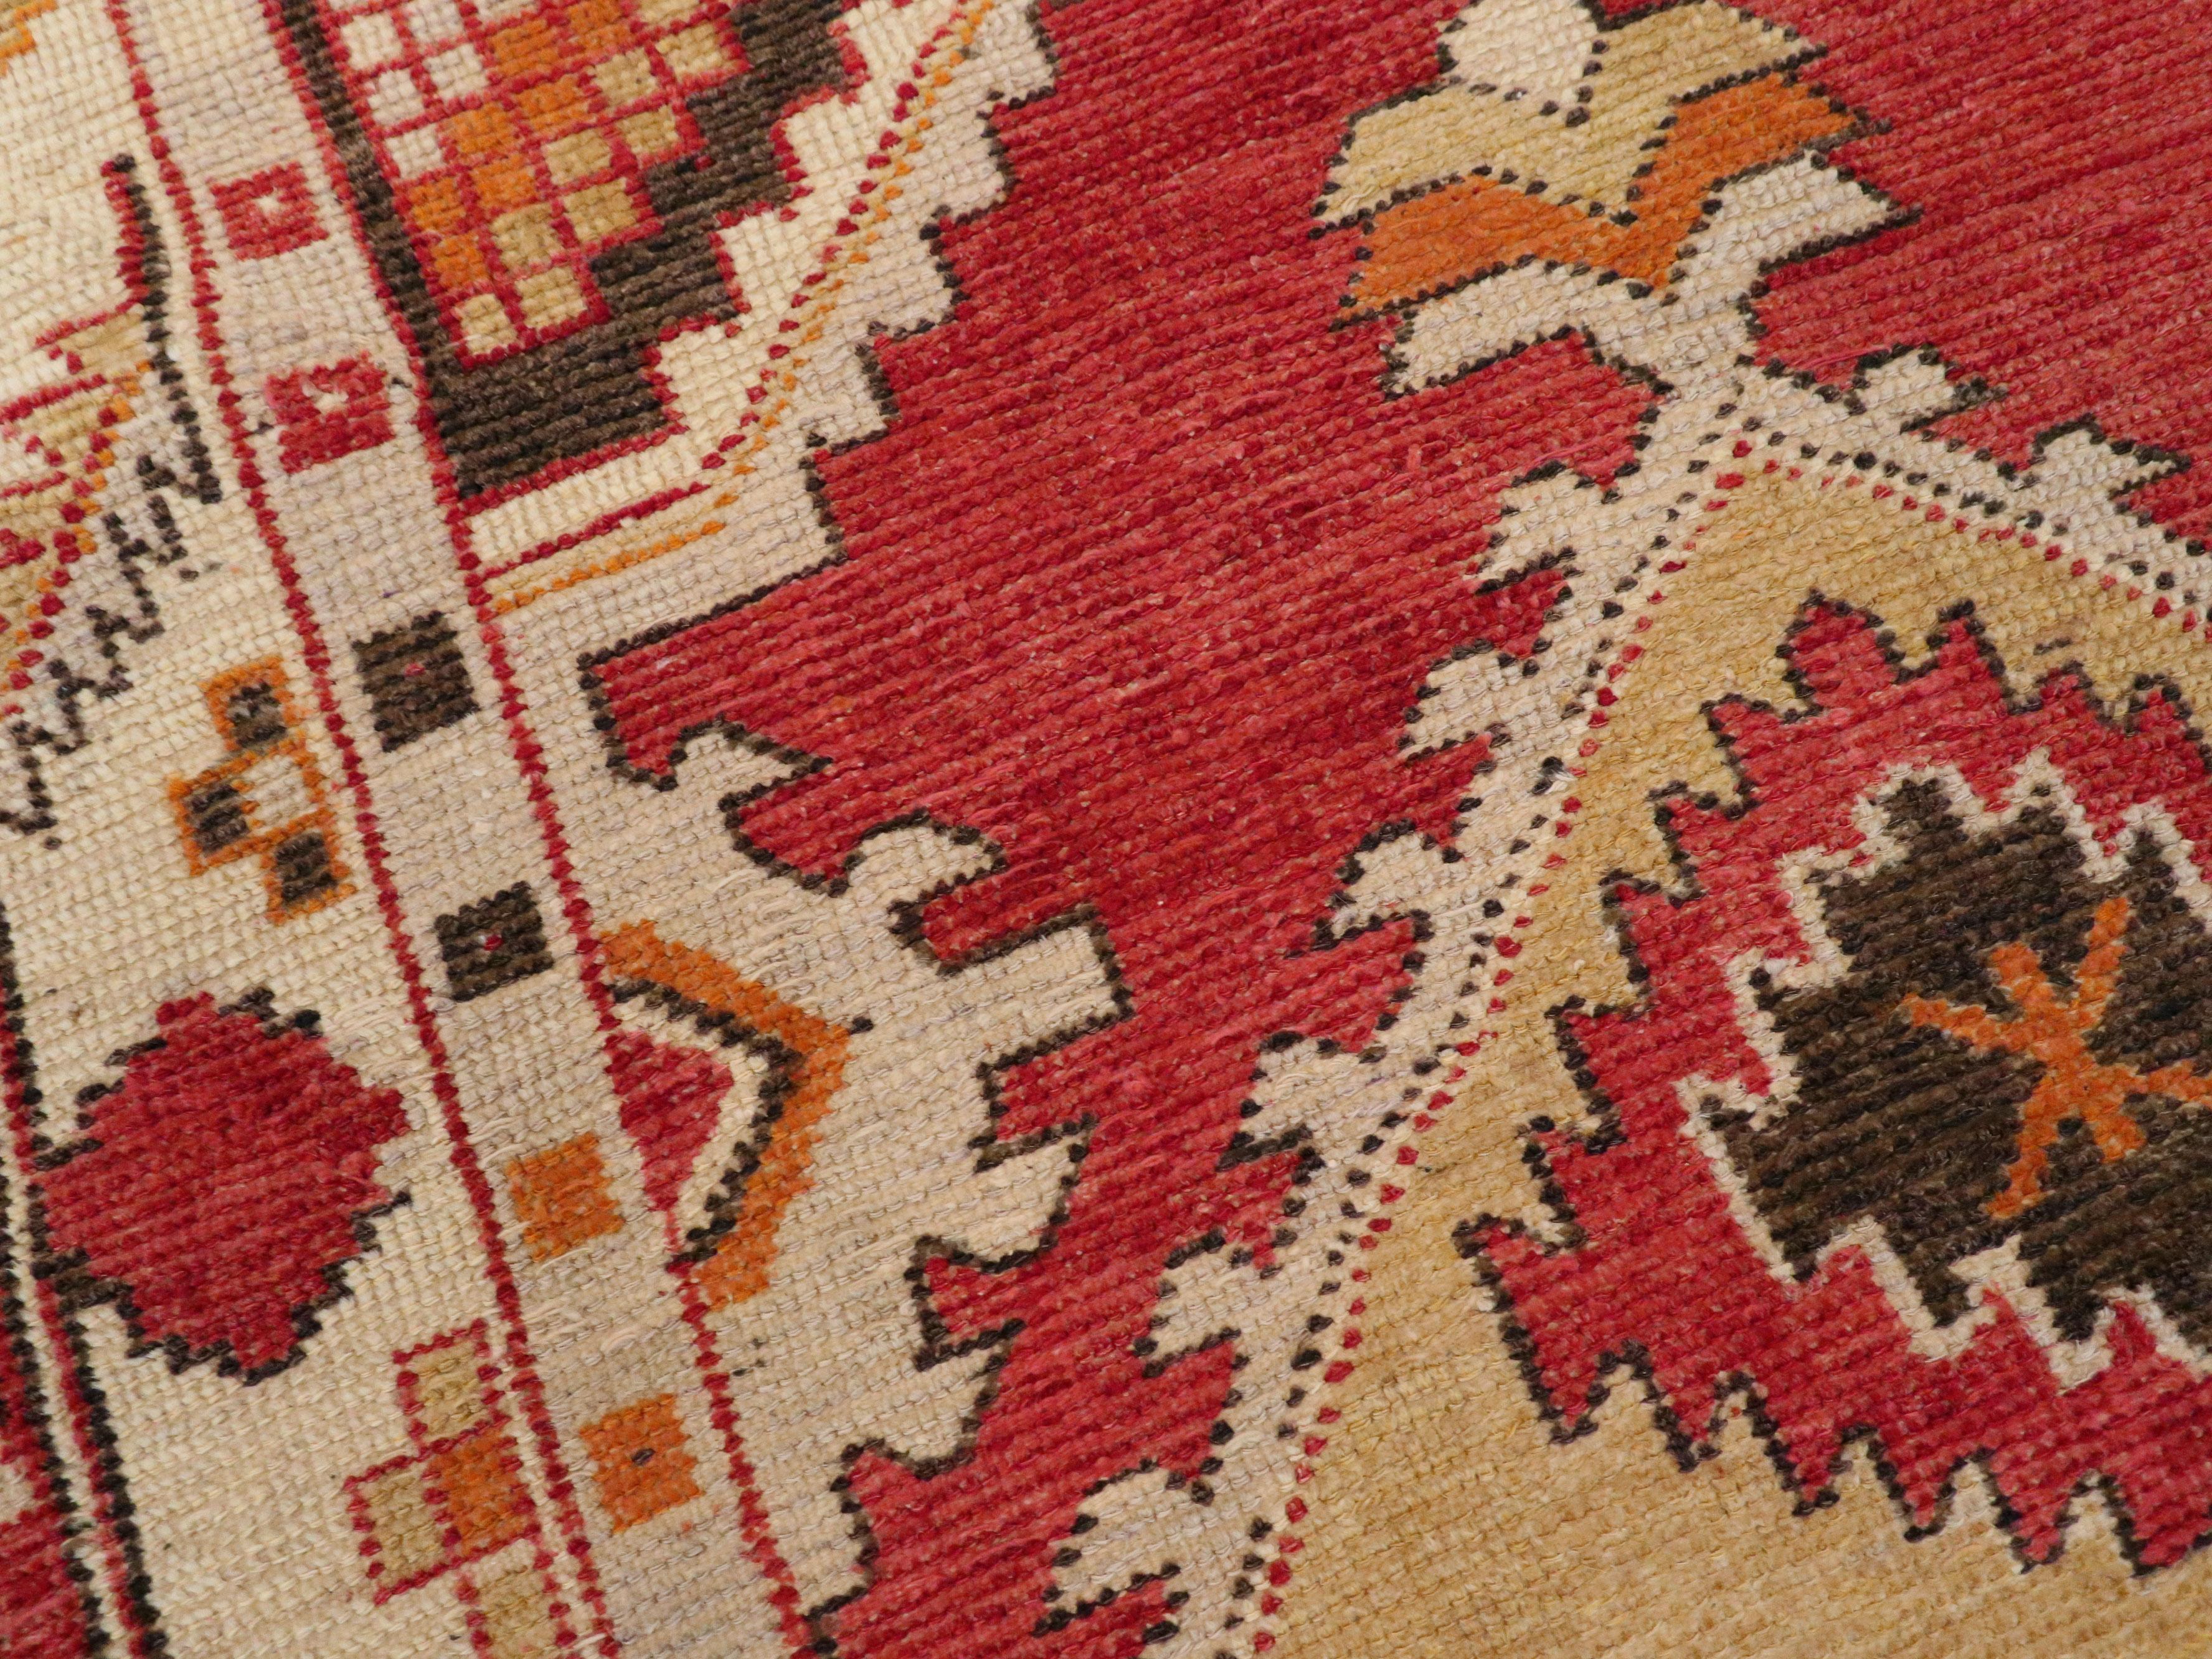 20th Century Midcentury Handmade Turkish Oushak Throw Rug In Red and Ivory For Sale